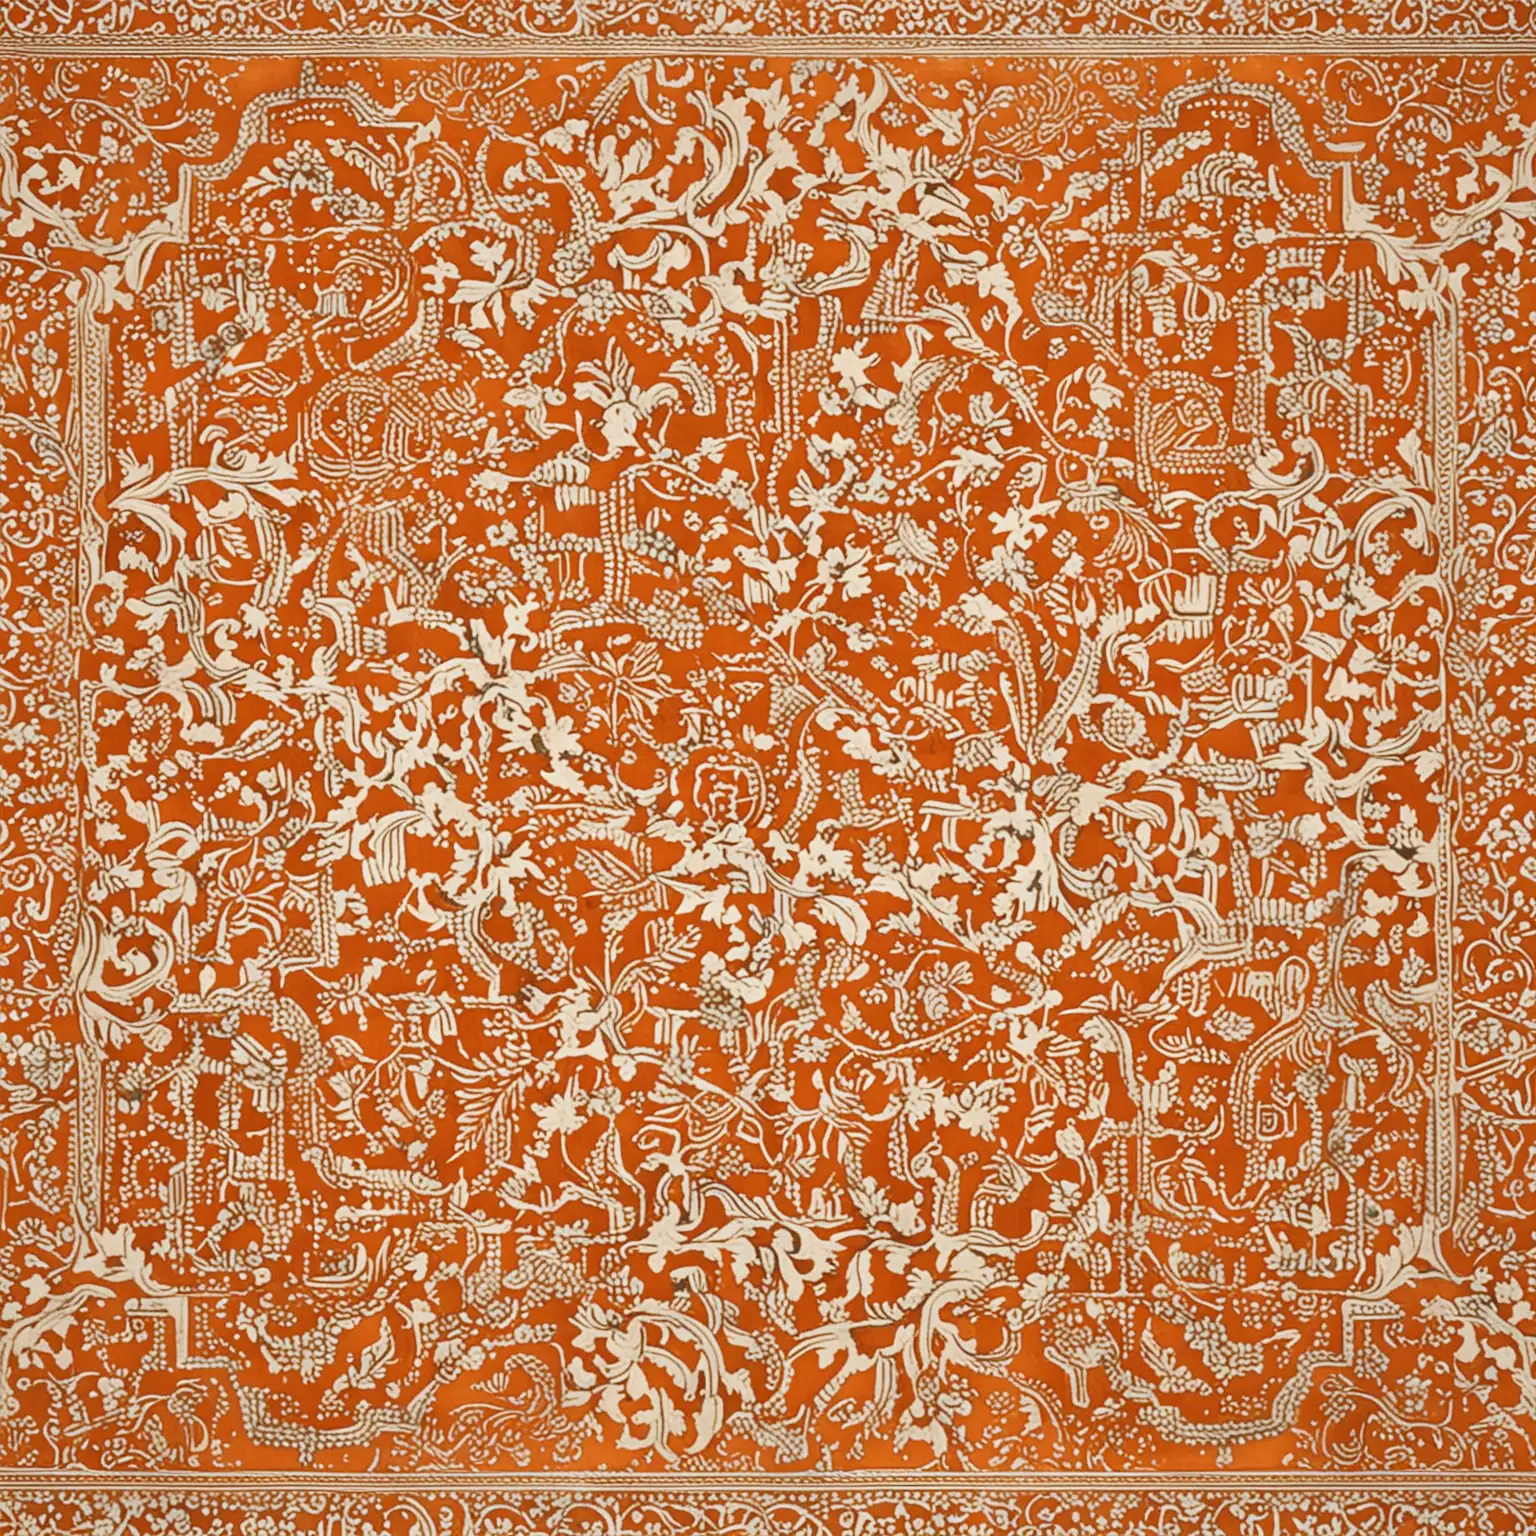 seamless, - large pattern on painted wall decoration. in the style of Amer (Amber) Fort & Palace - Jaipur, India 